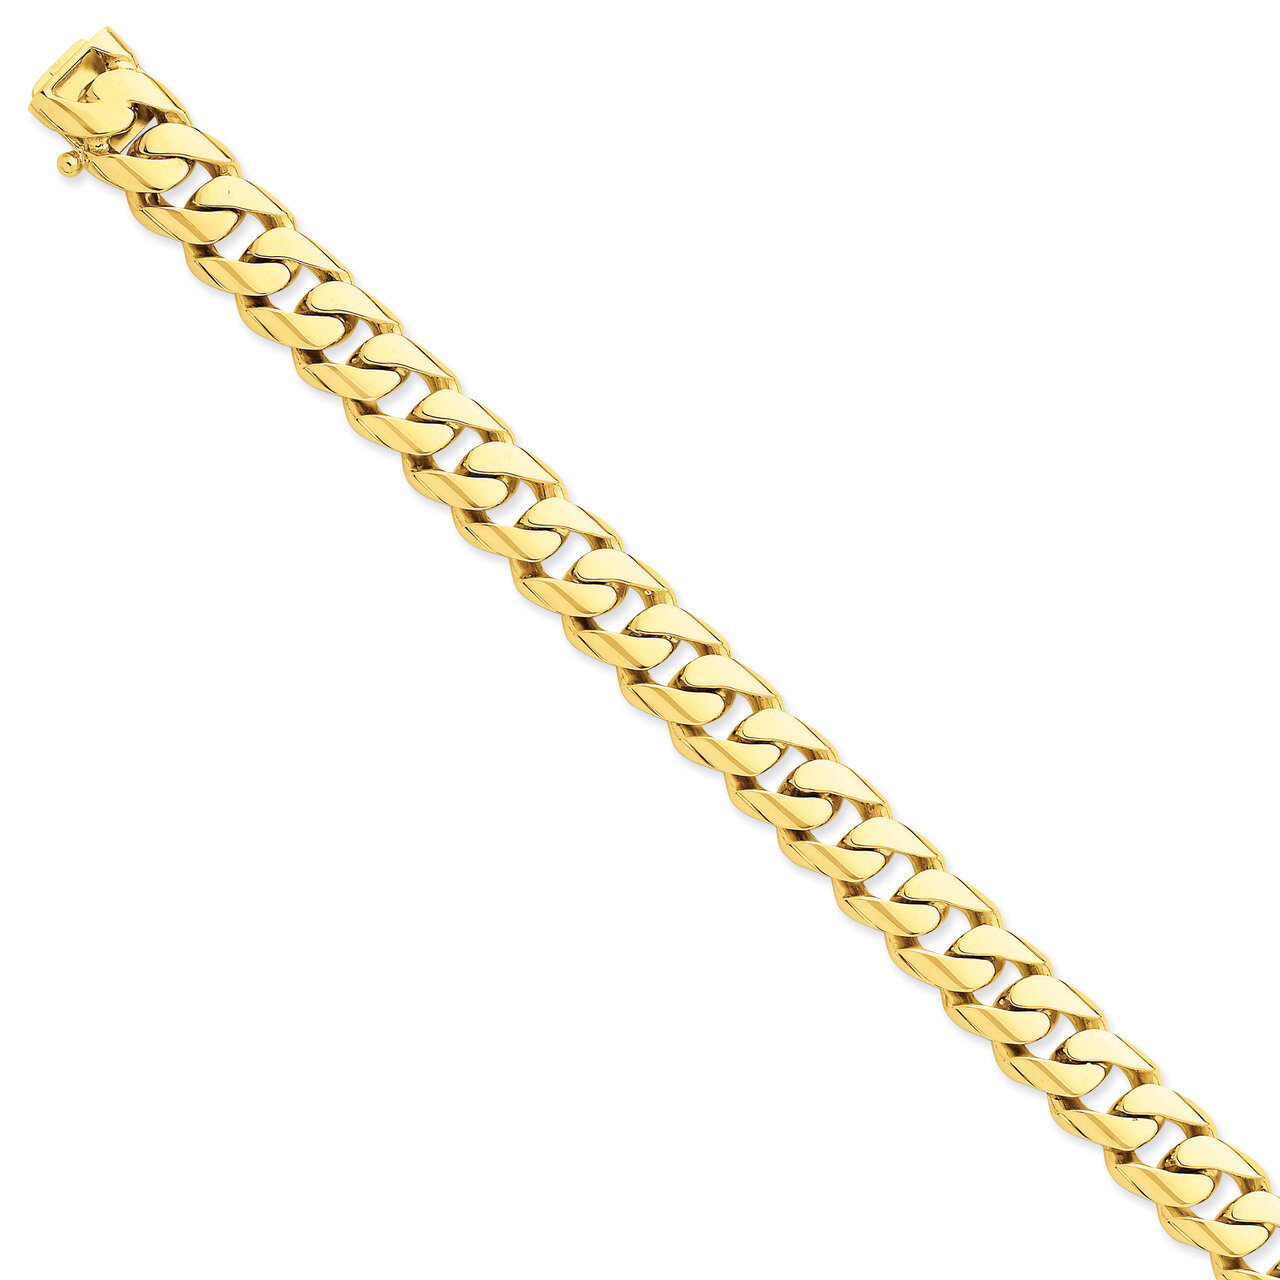 11mm Hand-polished Rounded Curb Link Chain 22 Inch 14k Gold LK127-22